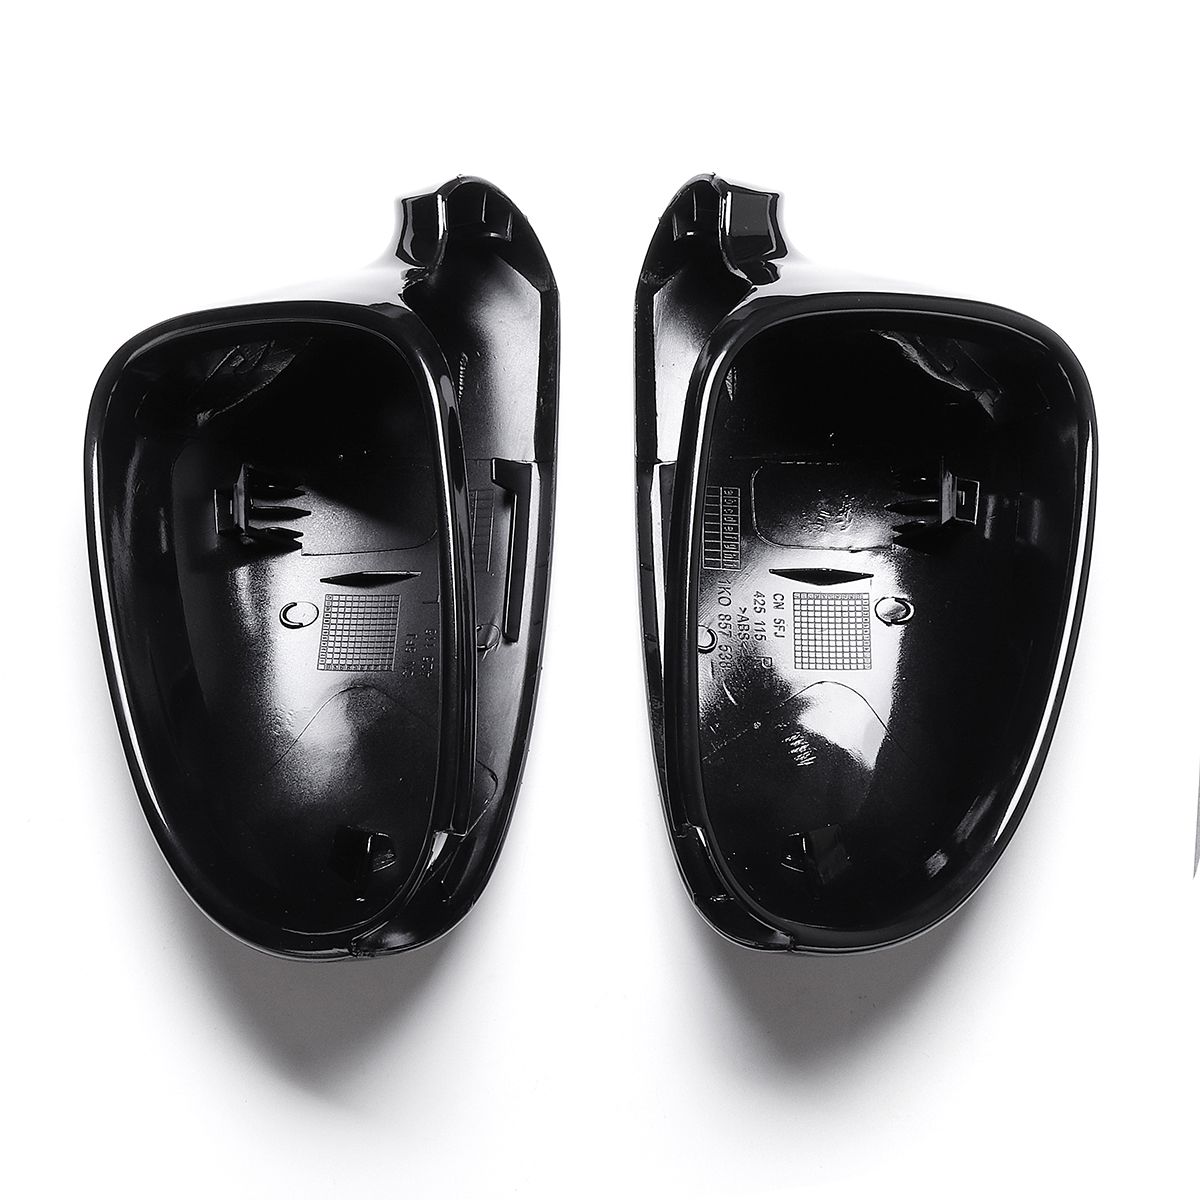 Pair-Car-Front-Wing-Side-Mirror-Cover-Housing-Black-Cap-For-VW-Jetta-Golf-MK5-Eos-for-SKODA-for-SEAT-1396027